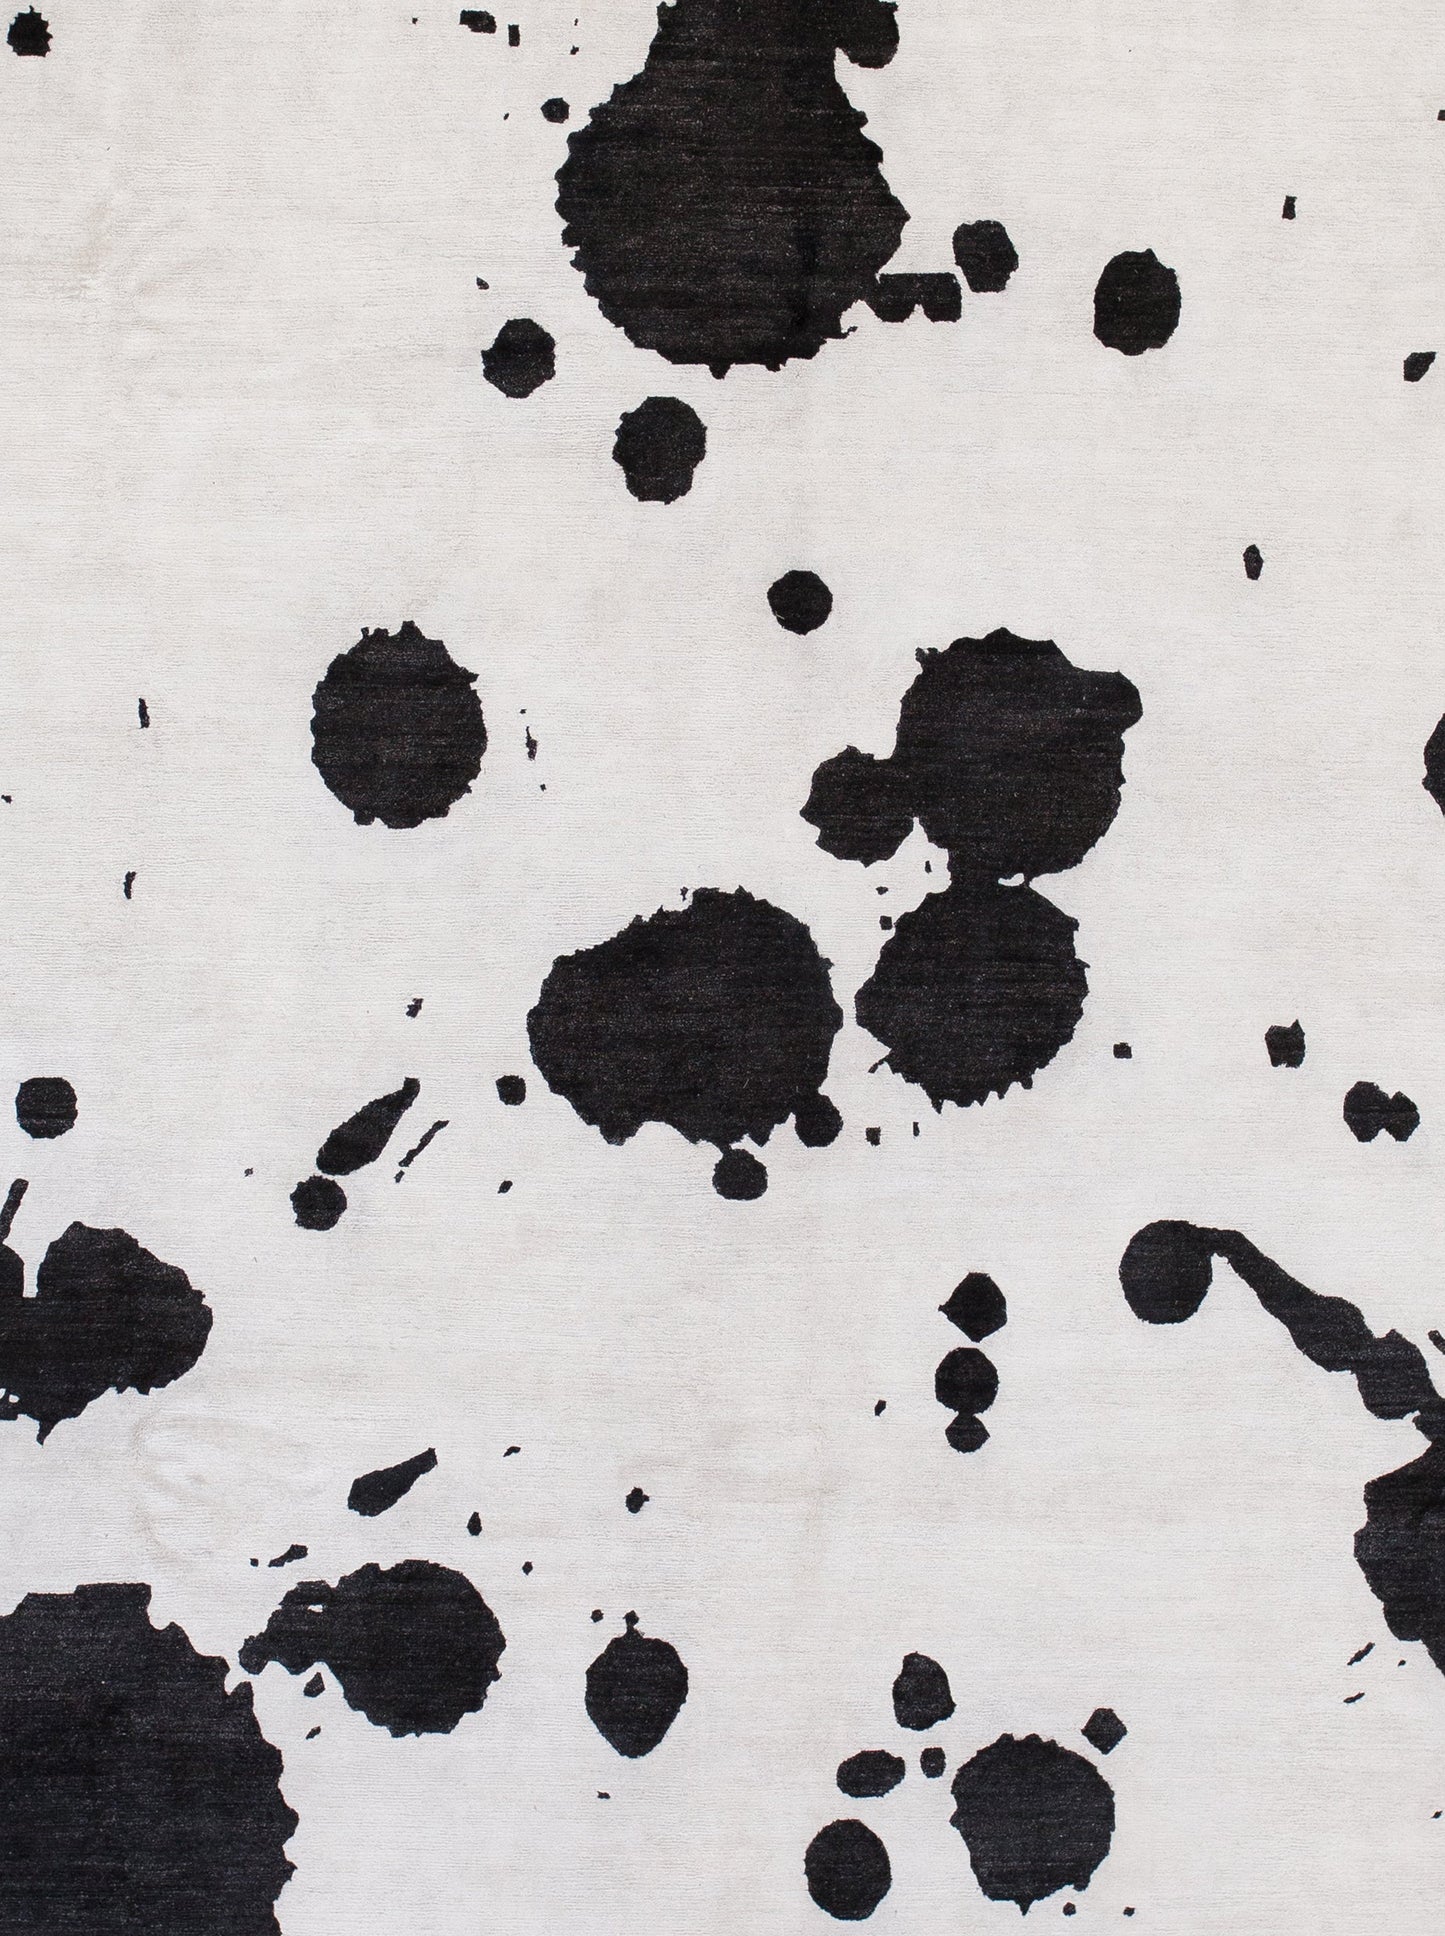 The close up for this rug shows the rug texture of the black splash pattern.